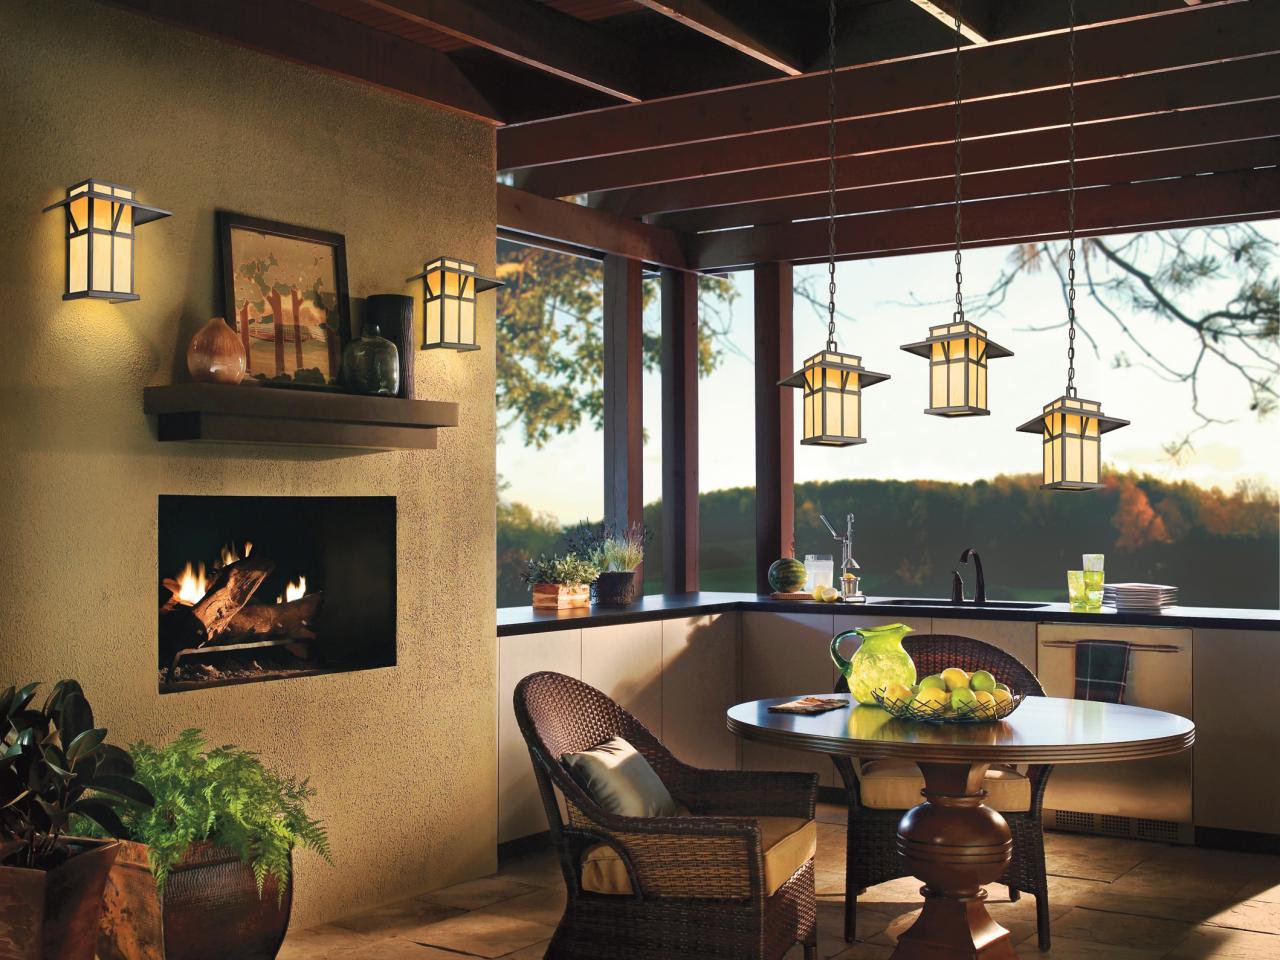 Outdoor Living Spaces Ideas For Outdoor Rooms Hgtv for outdoor living room lighting pertaining to Your home